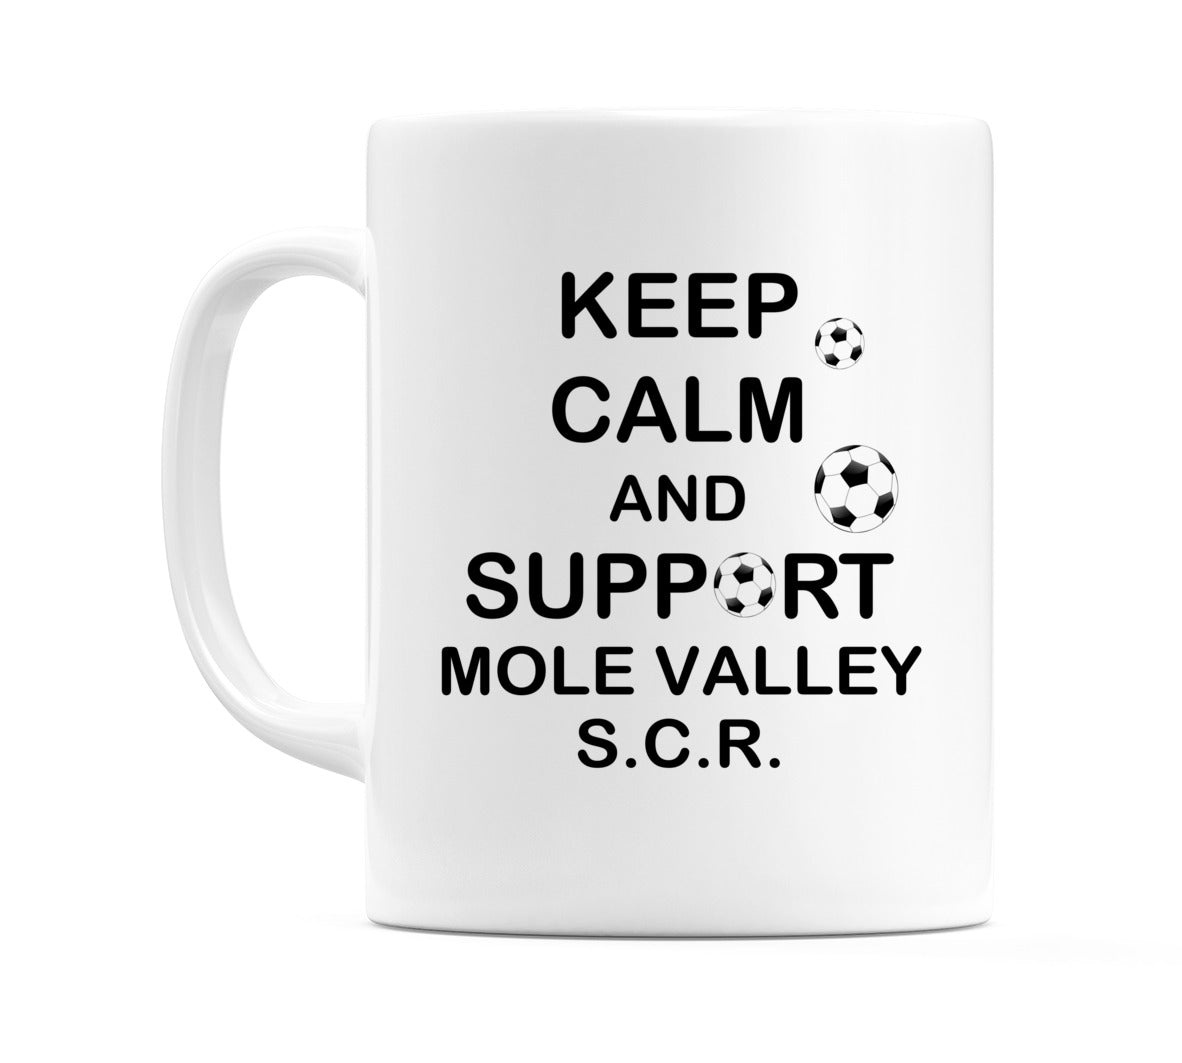 Keep Calm And Support Mole Valley S.C.R. Mug